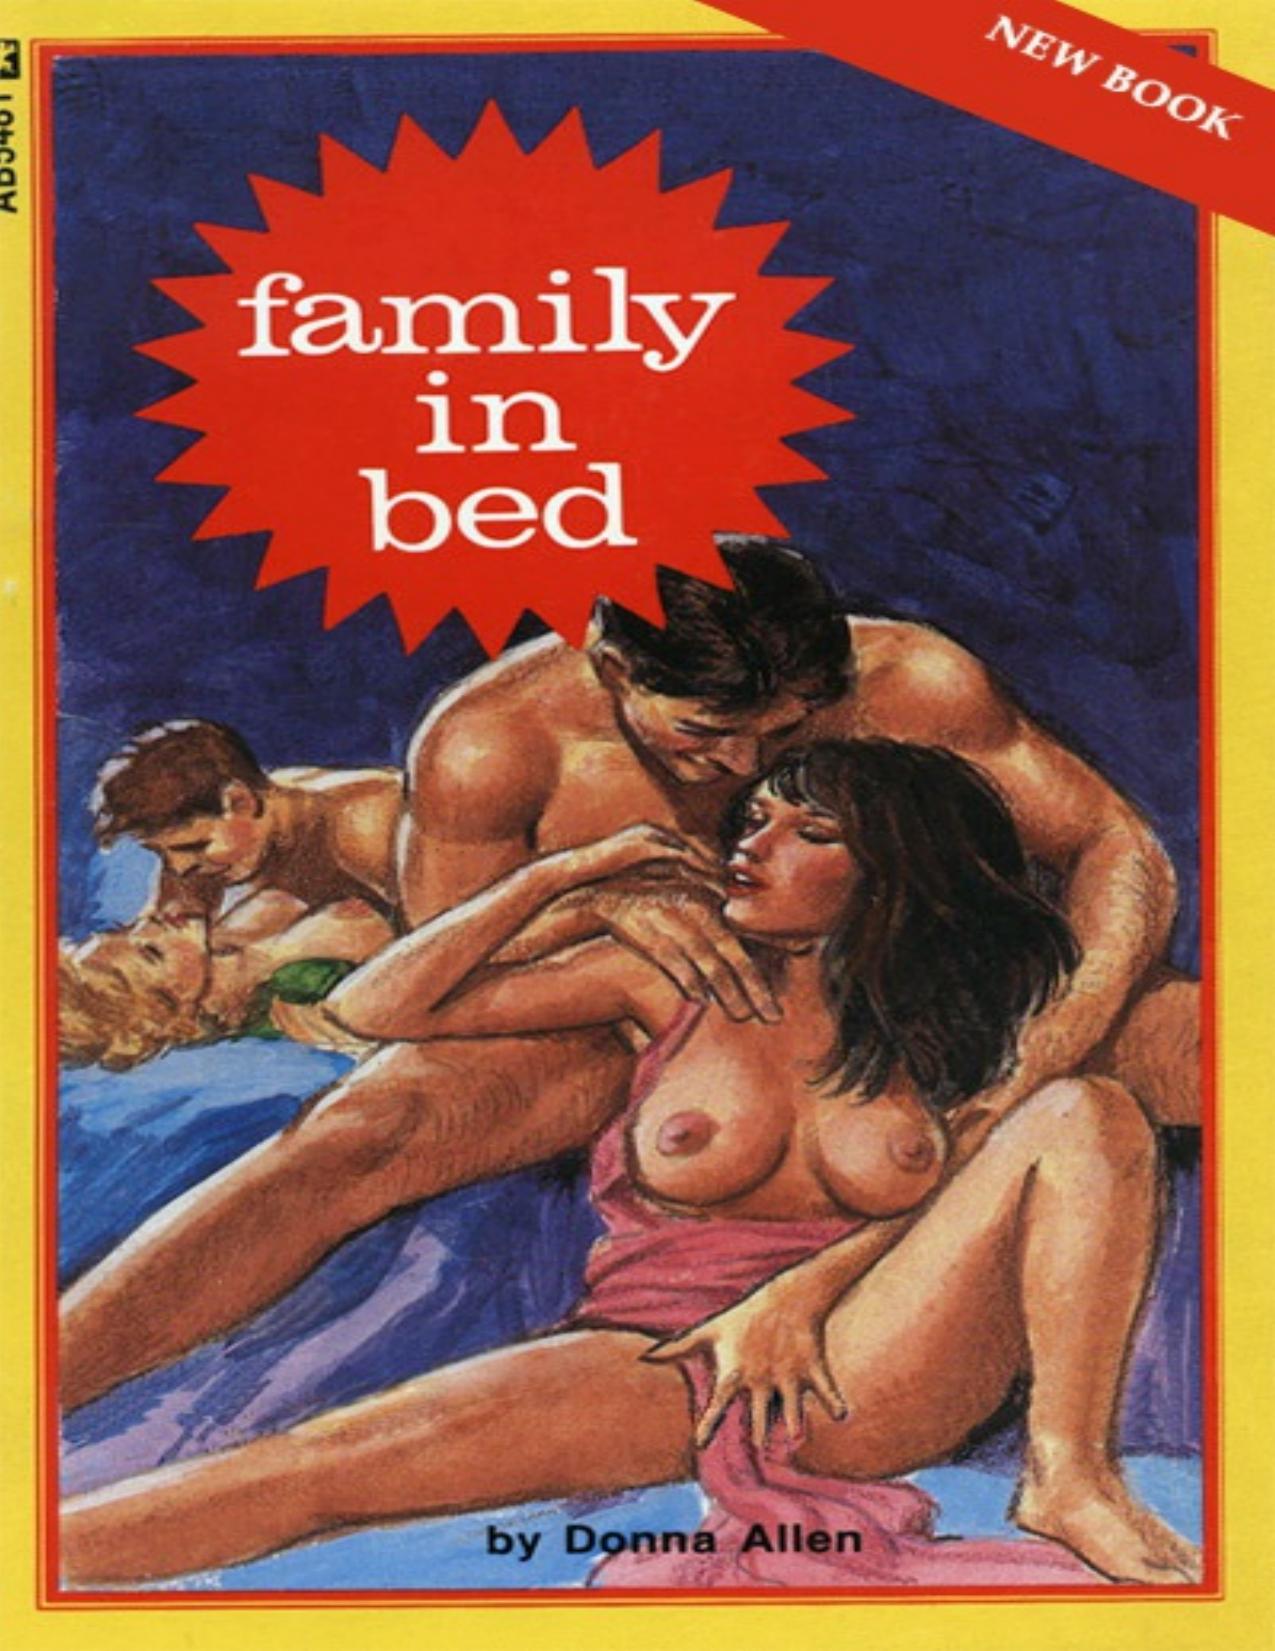 Family In Bed by Donna Allen